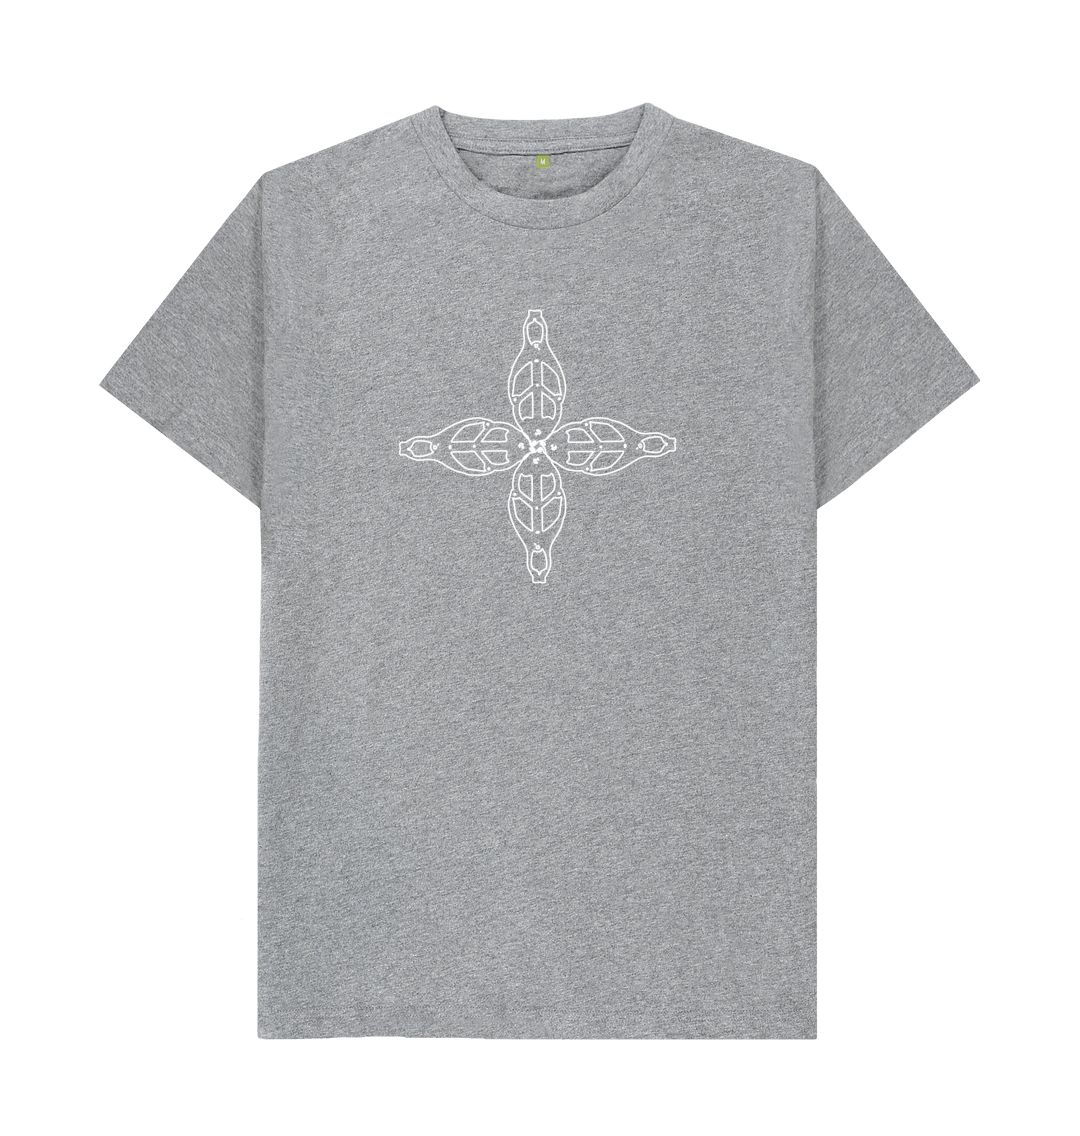 Athletic Grey Clover clamps unisex T-shirt